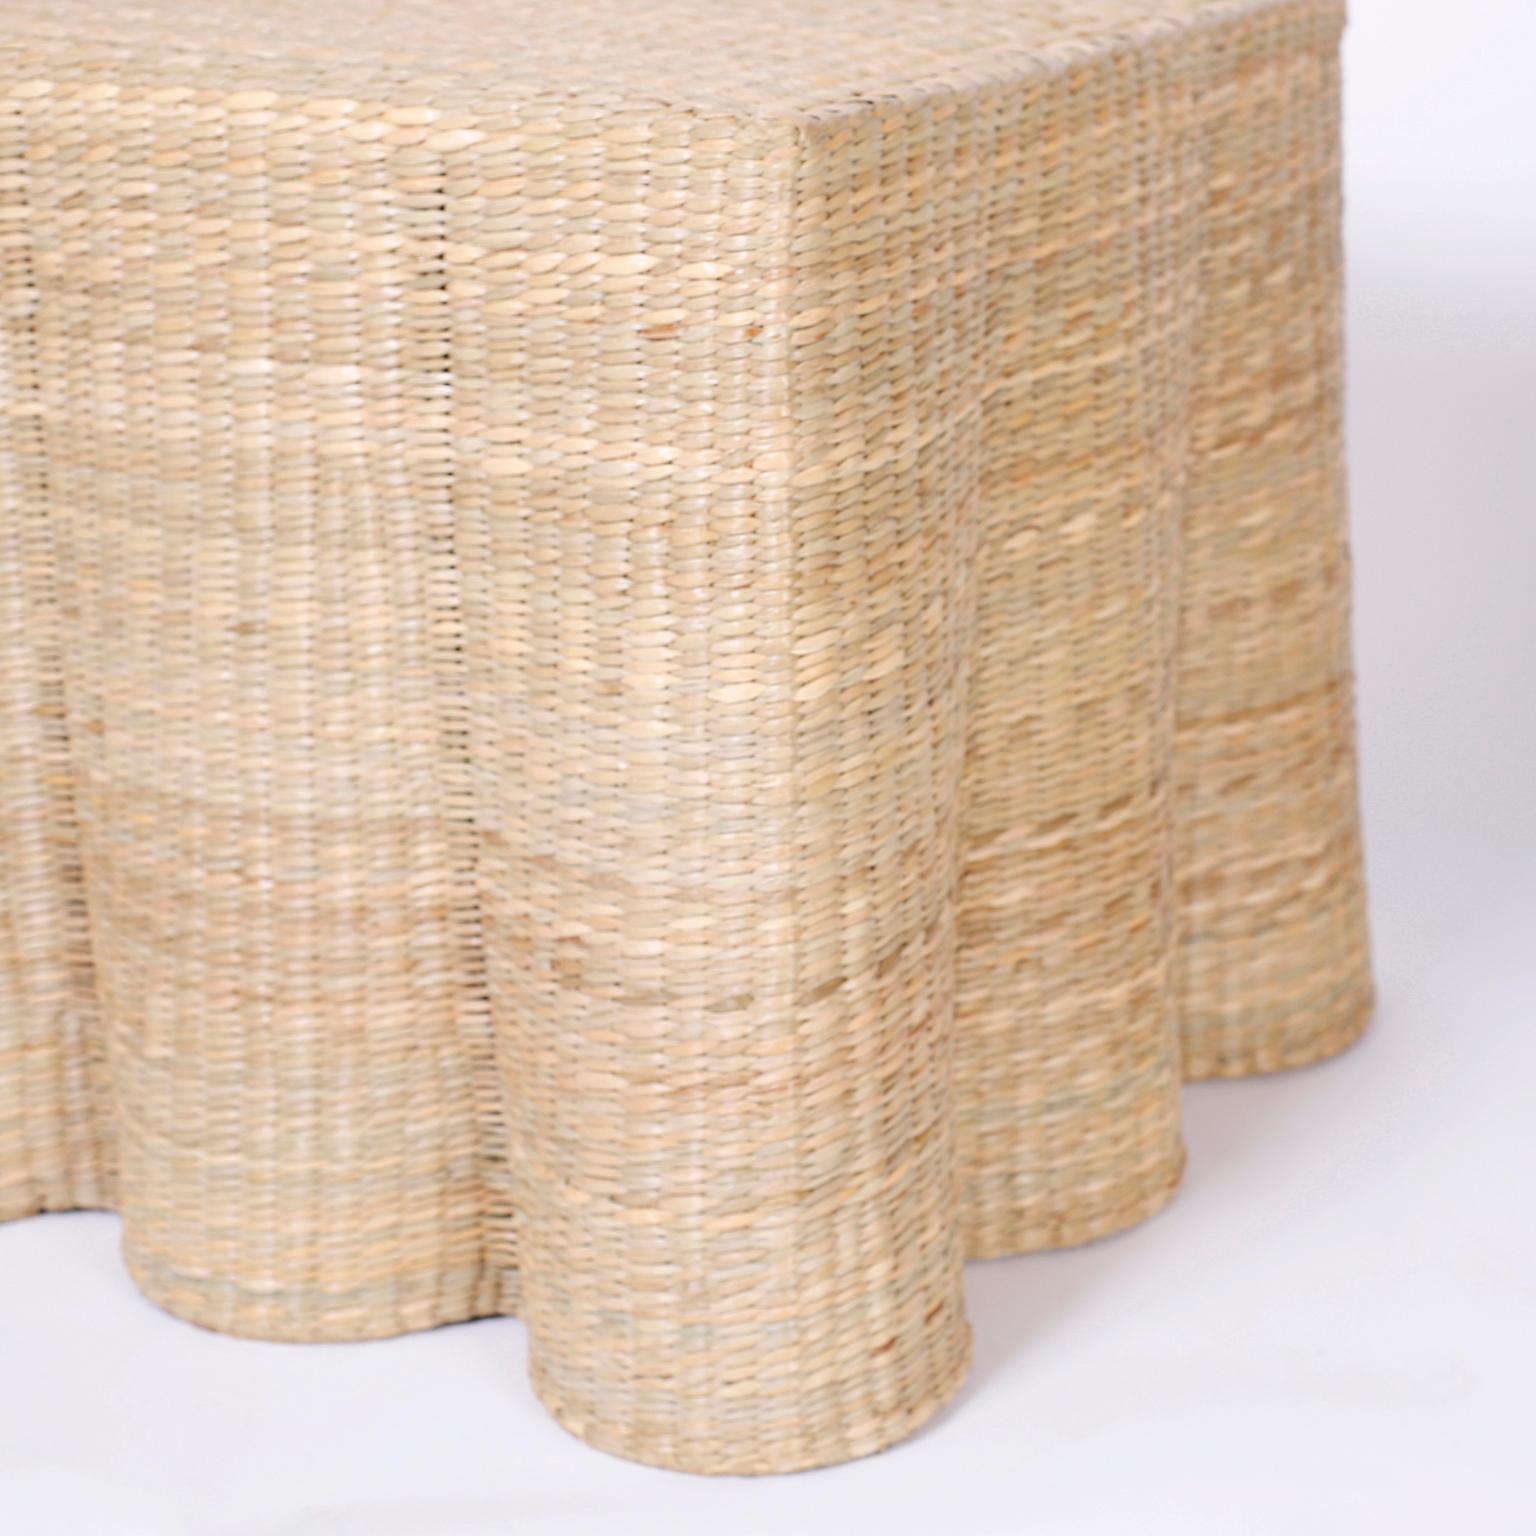 Pair of Wicker Drapery Ghost End Tables or Stands from the FS Flores Collection 1